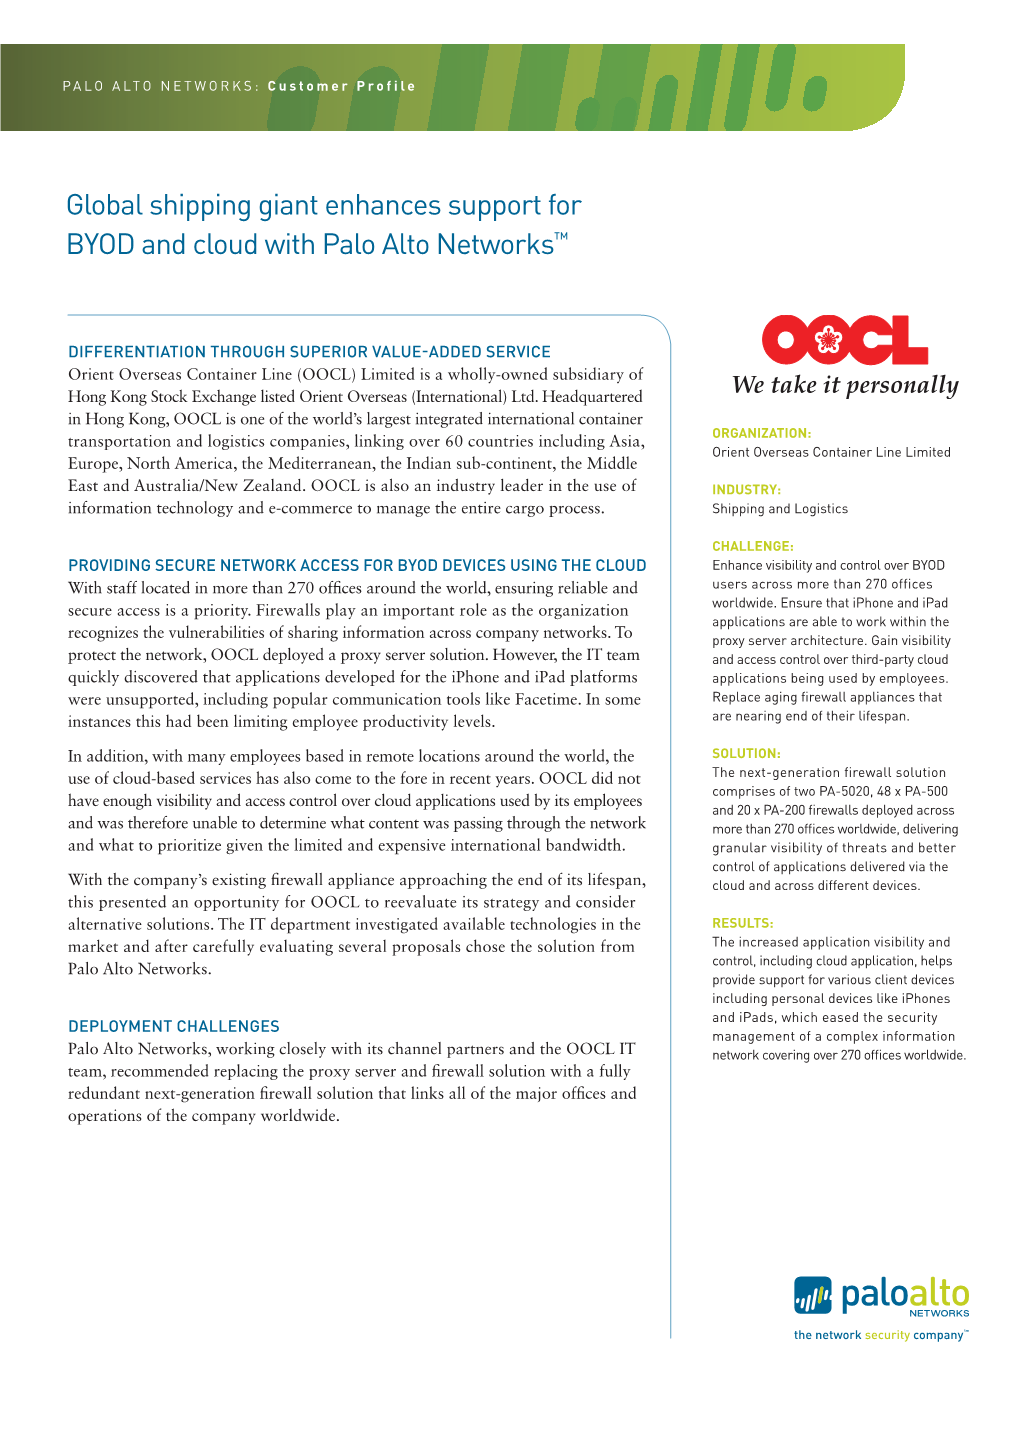 Global Shipping Giant Enhances Support for BYOD and Cloud with Palo Alto Networks™